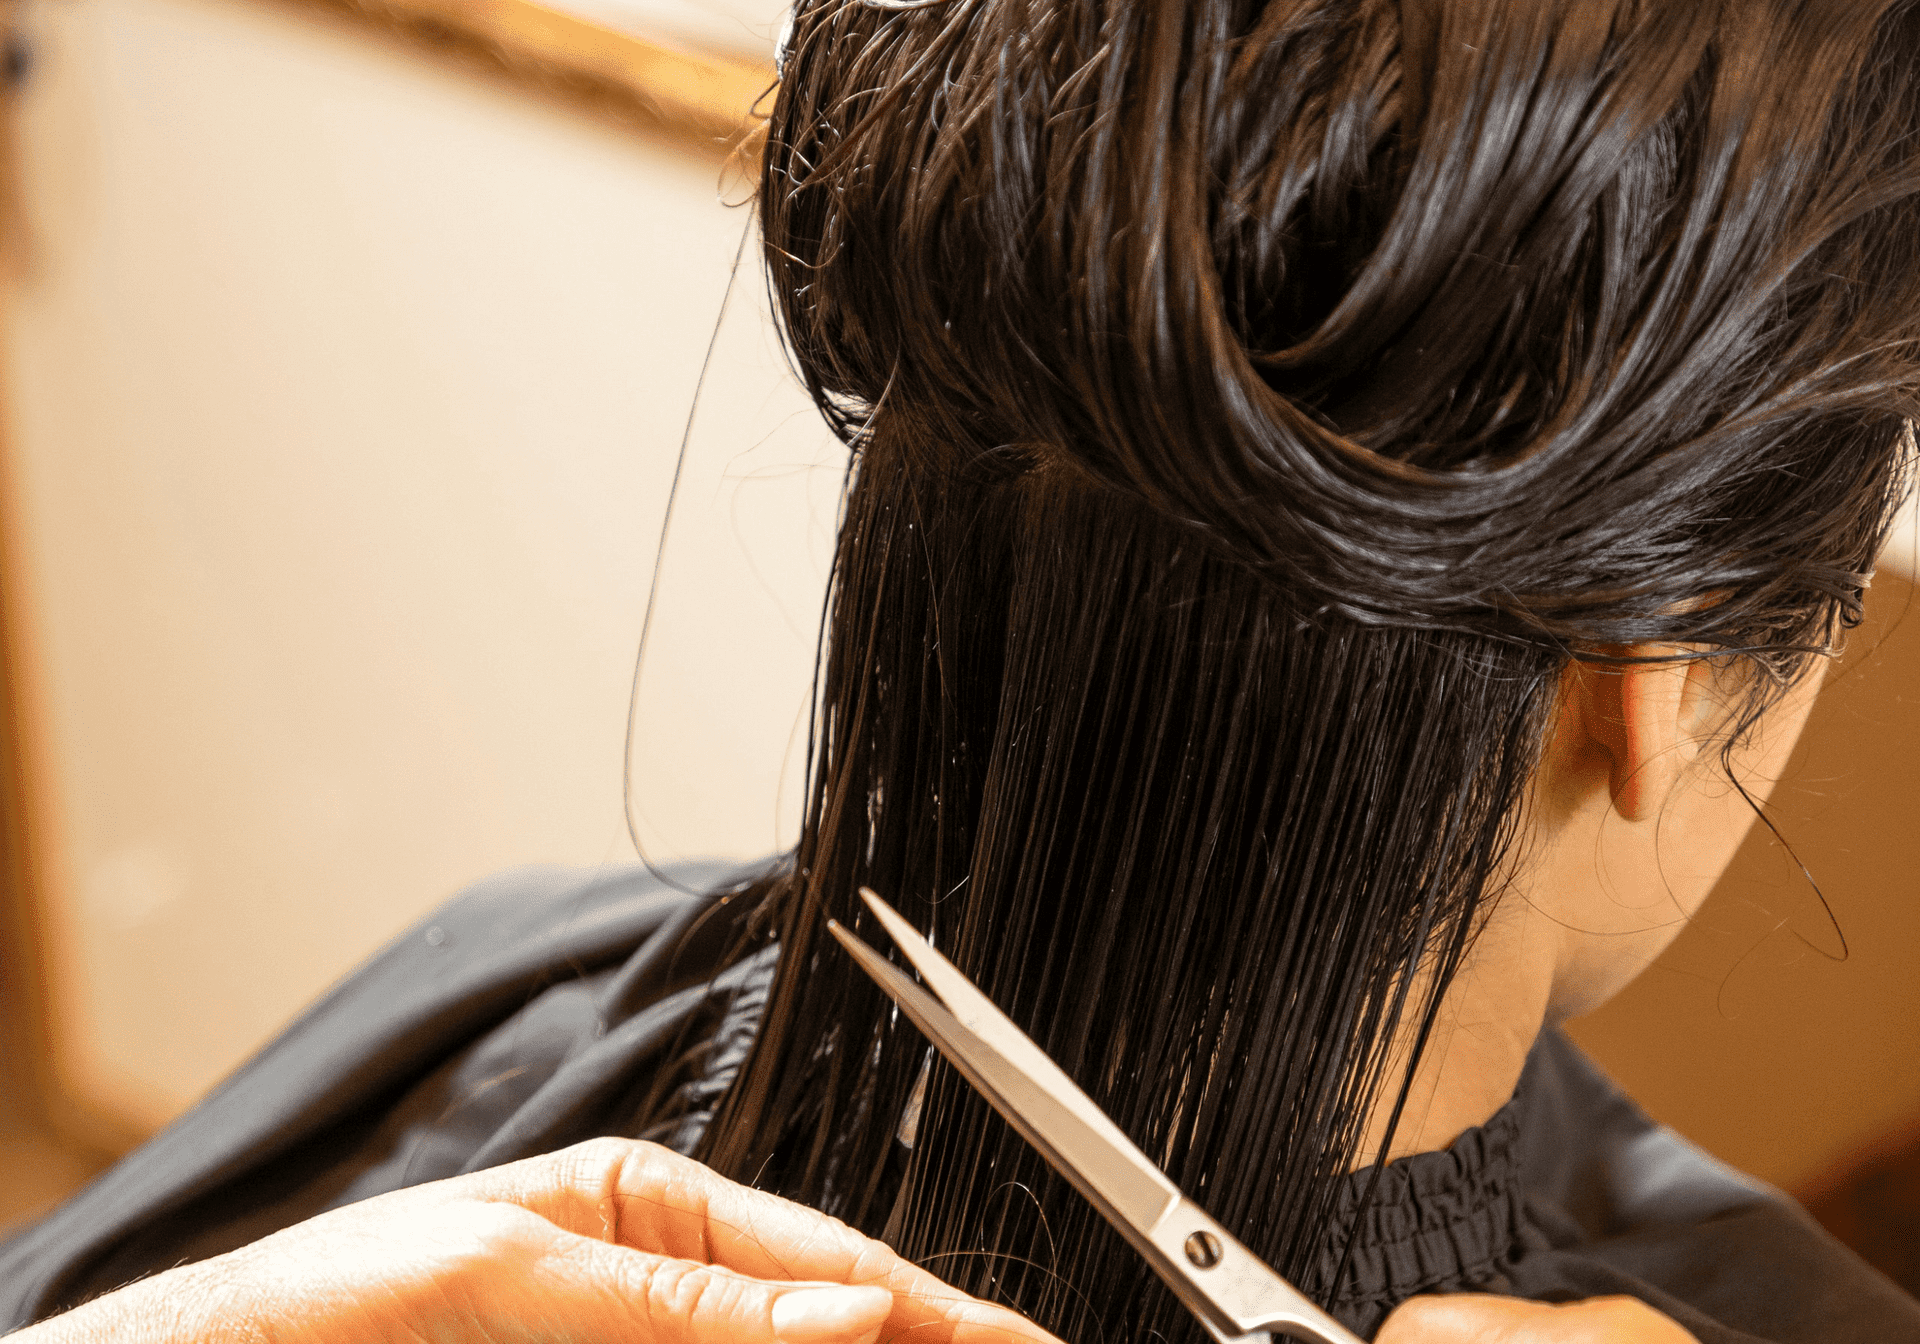 Person getting a haircut with scissors slicing through wet hair.